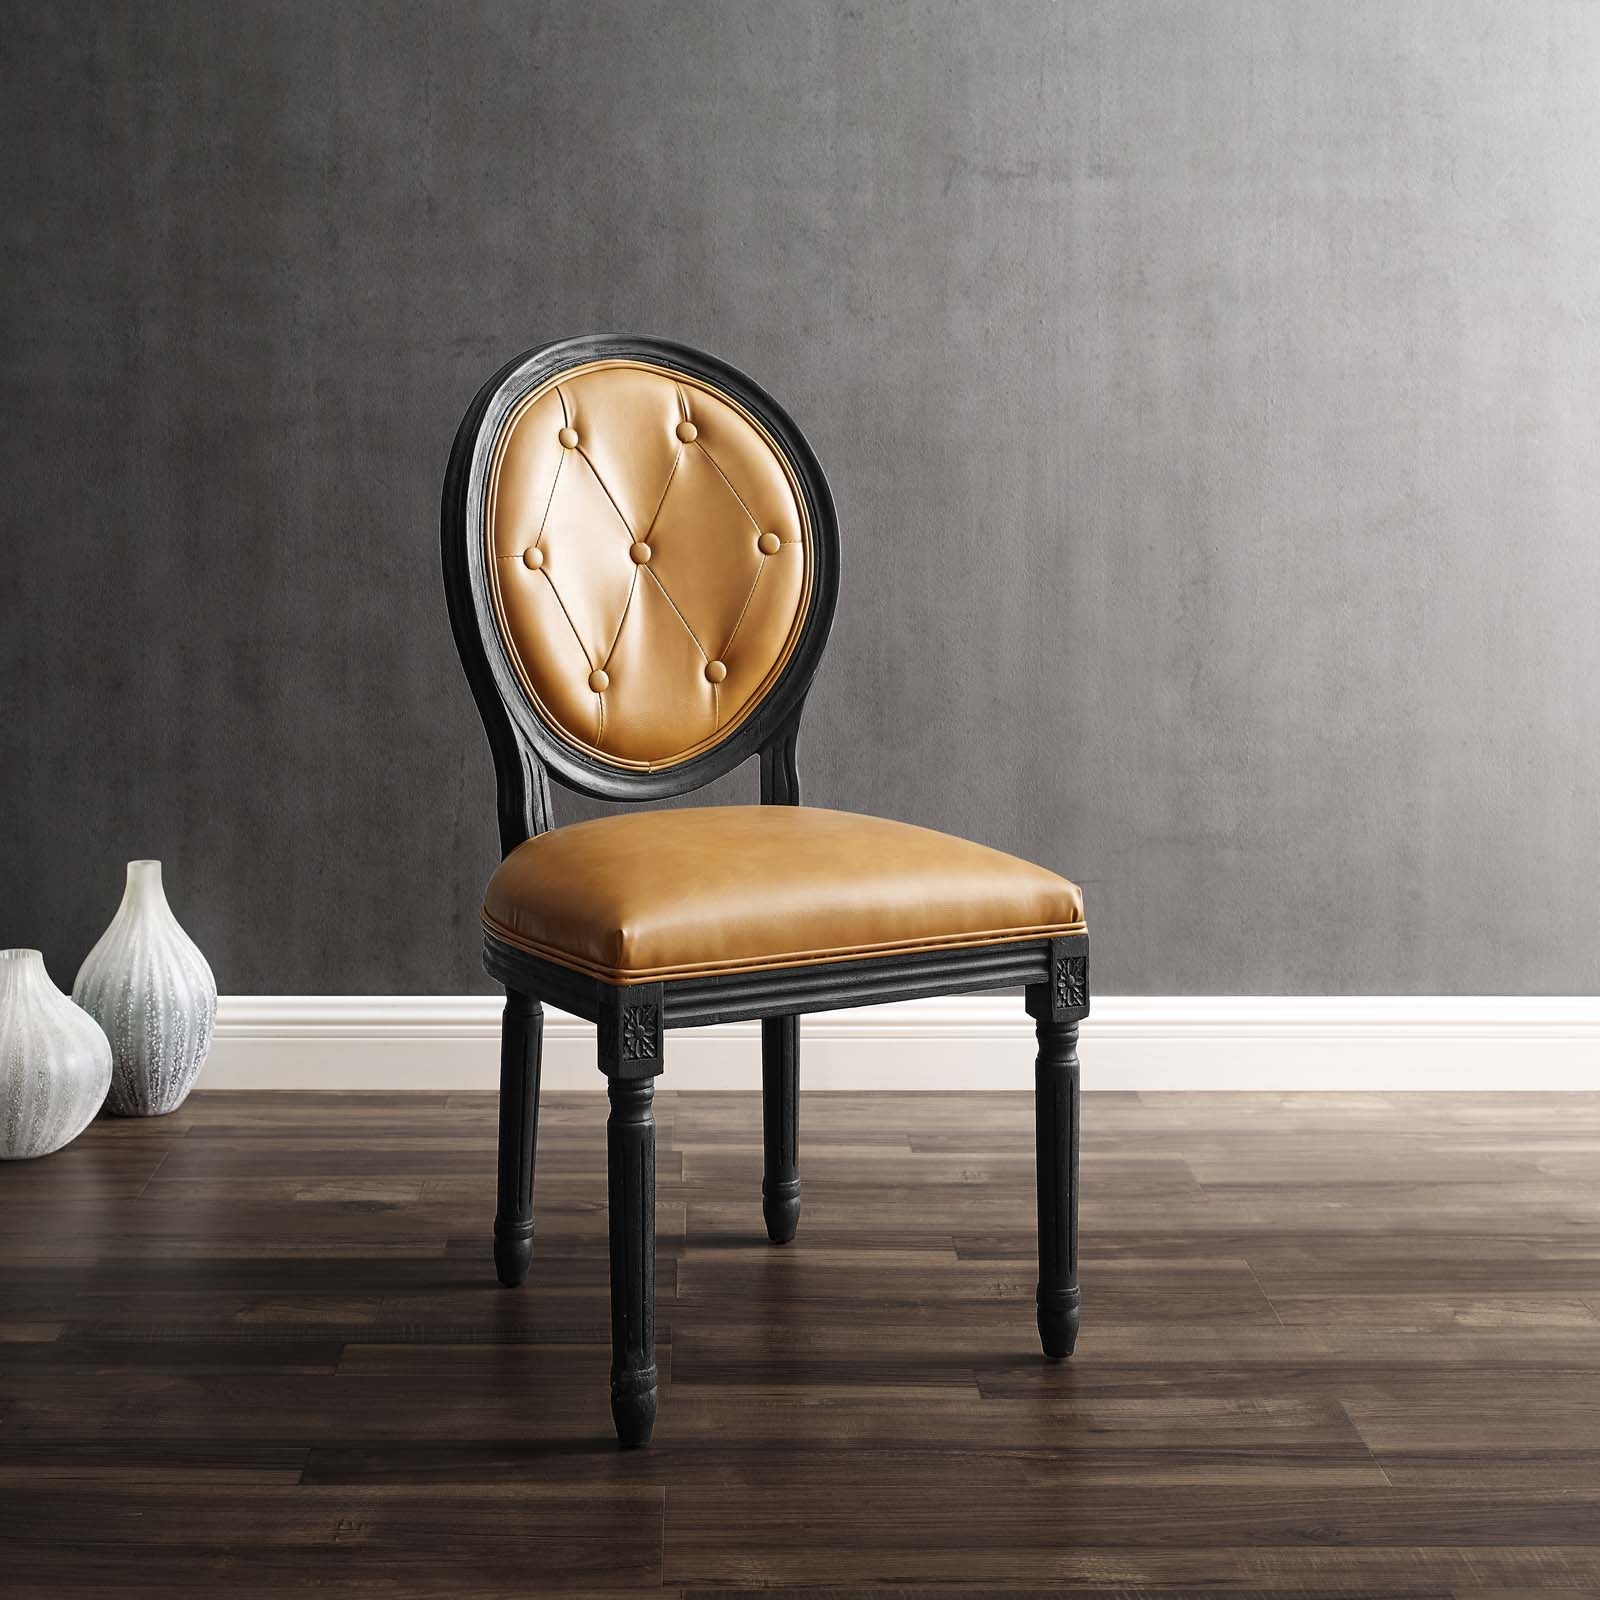 Arise Vintage French Vegan Leather Dining Side Chair - East Shore Modern Home Furnishings